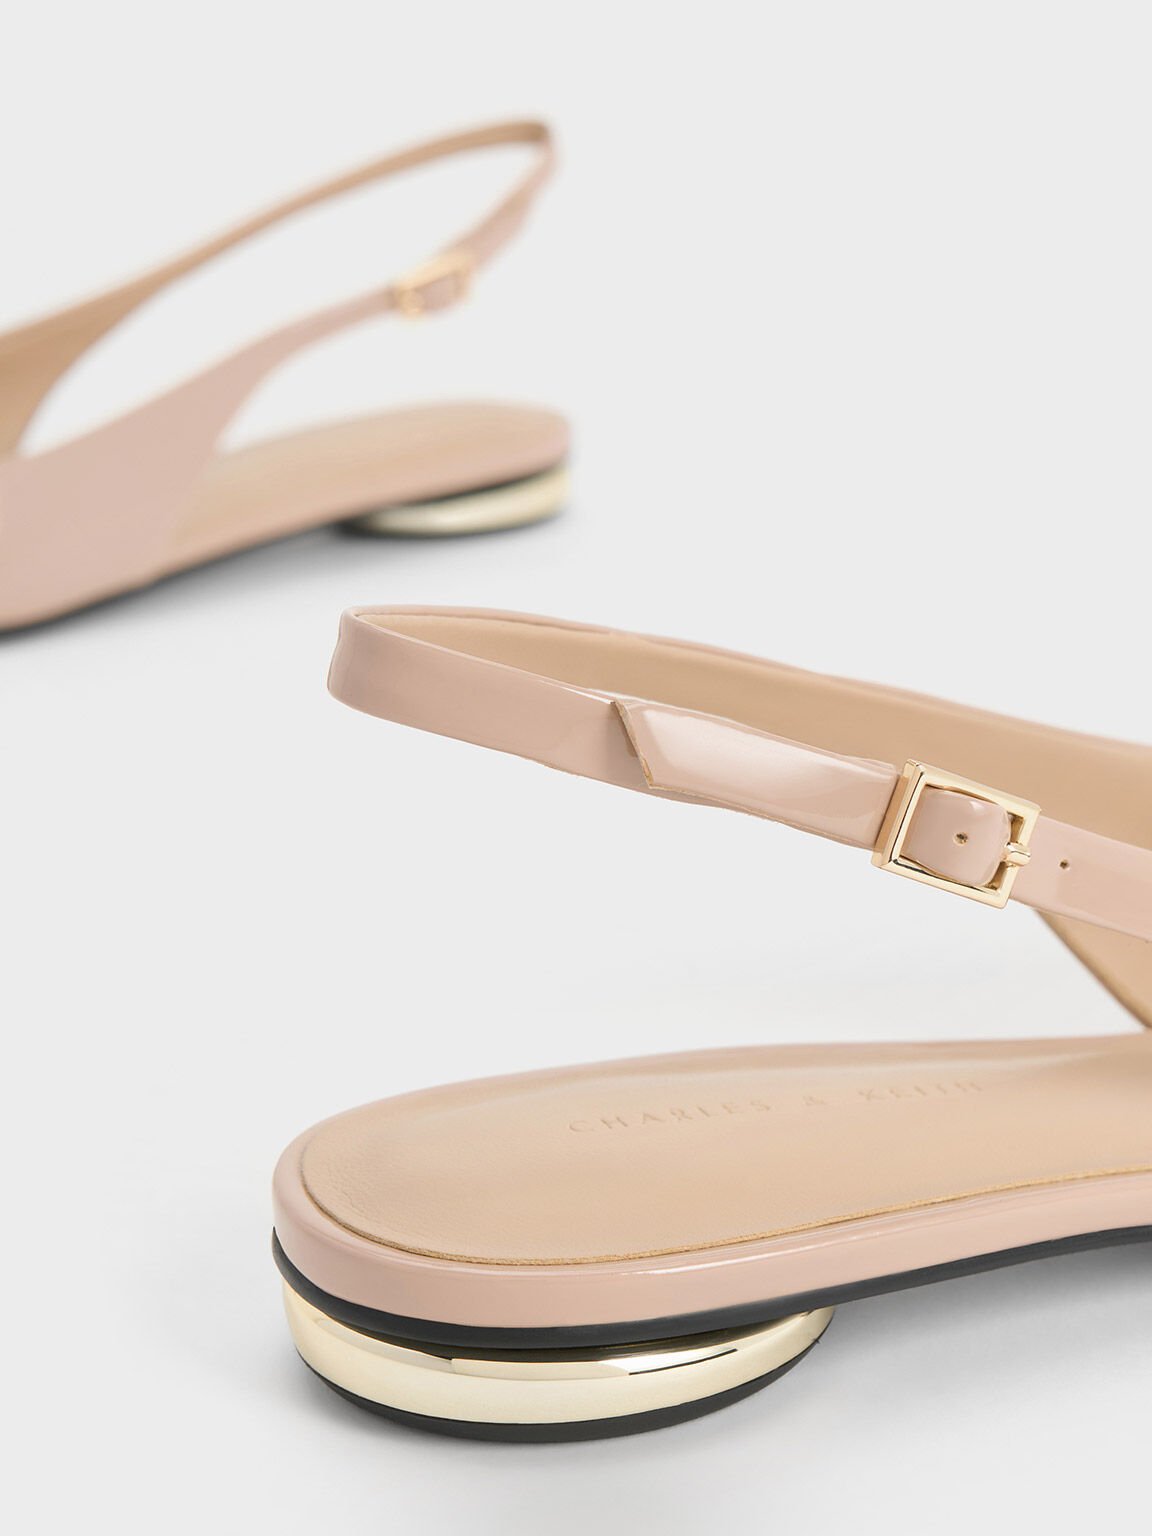 Nude Patent Pointed-Toe Slingback Flats - CHARLES & KEITH SG